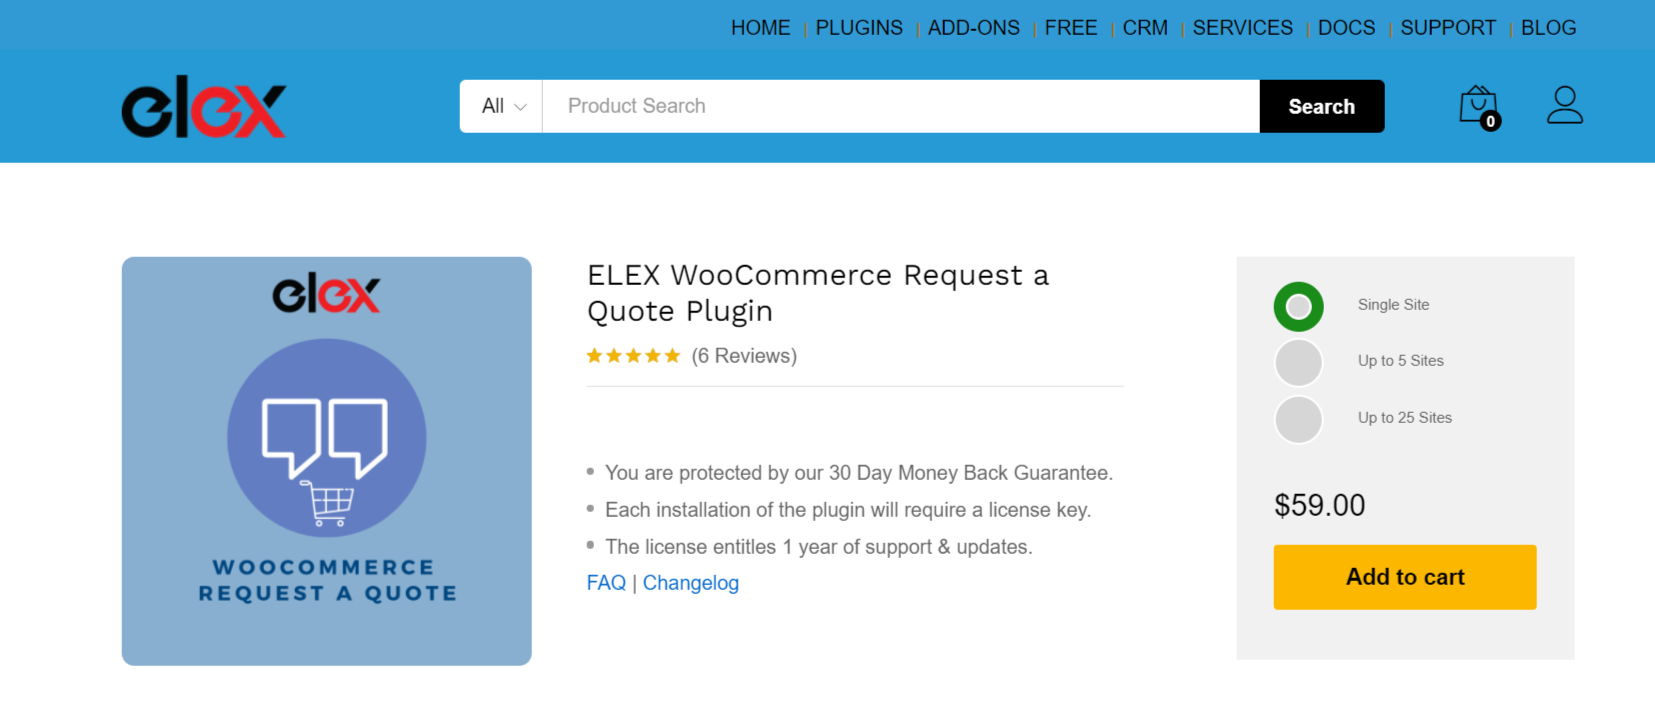 ELEX Request a Quote product page with a price of $59 